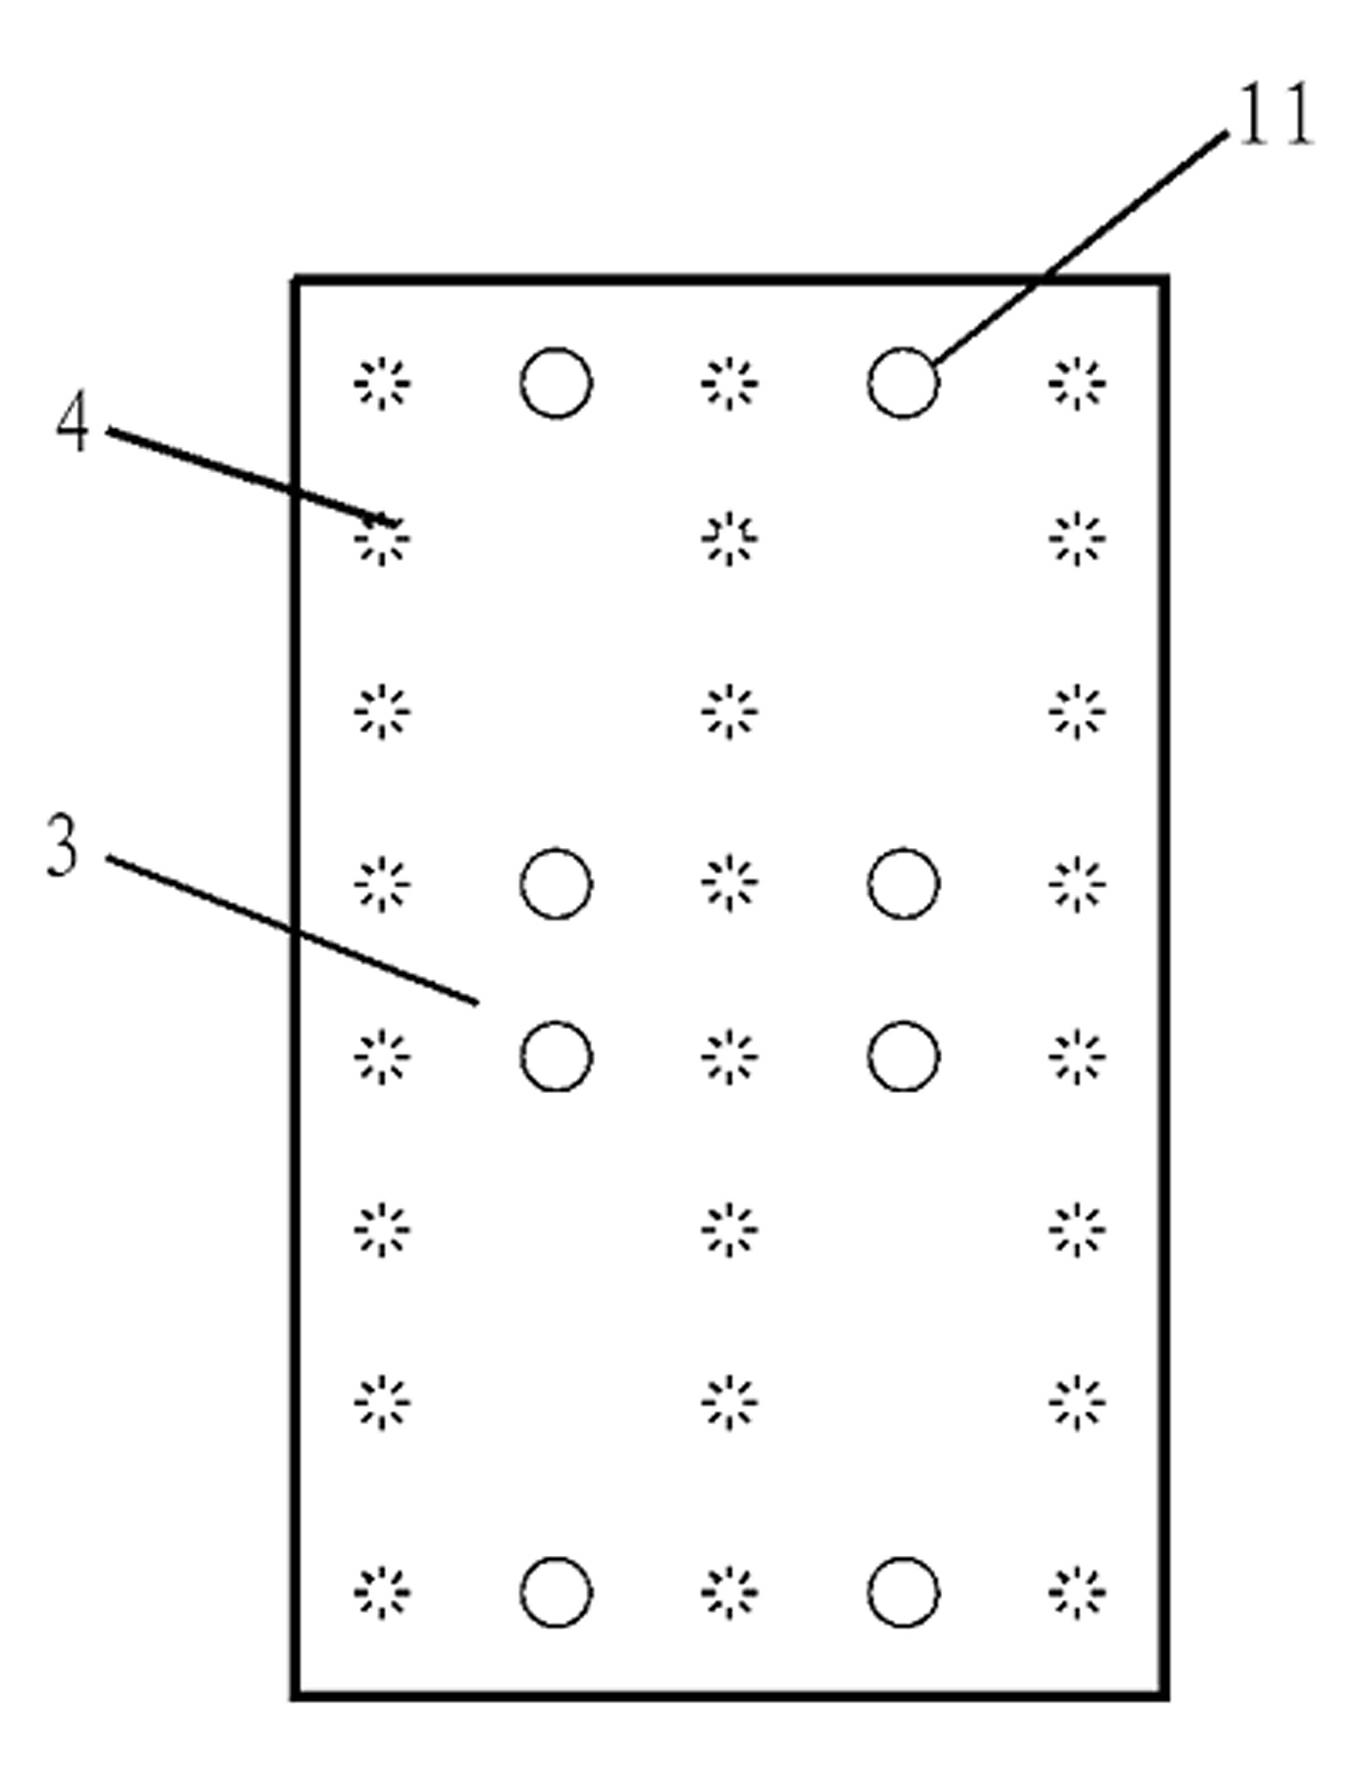 Steel beam and concrete wall semi-rigid full-bolted-connection joint